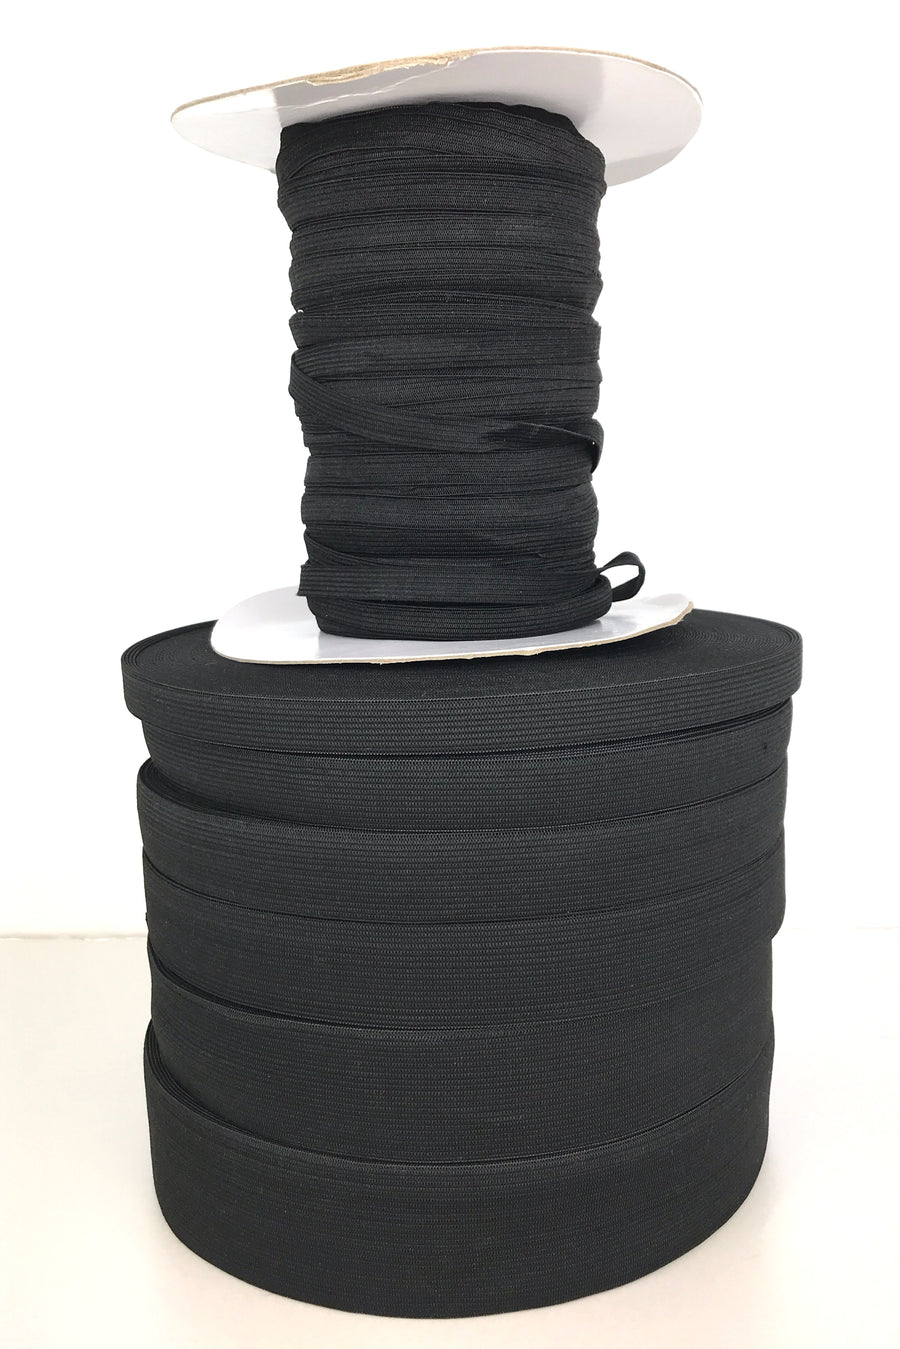 Black woven elastic from 1 cm to 5cm